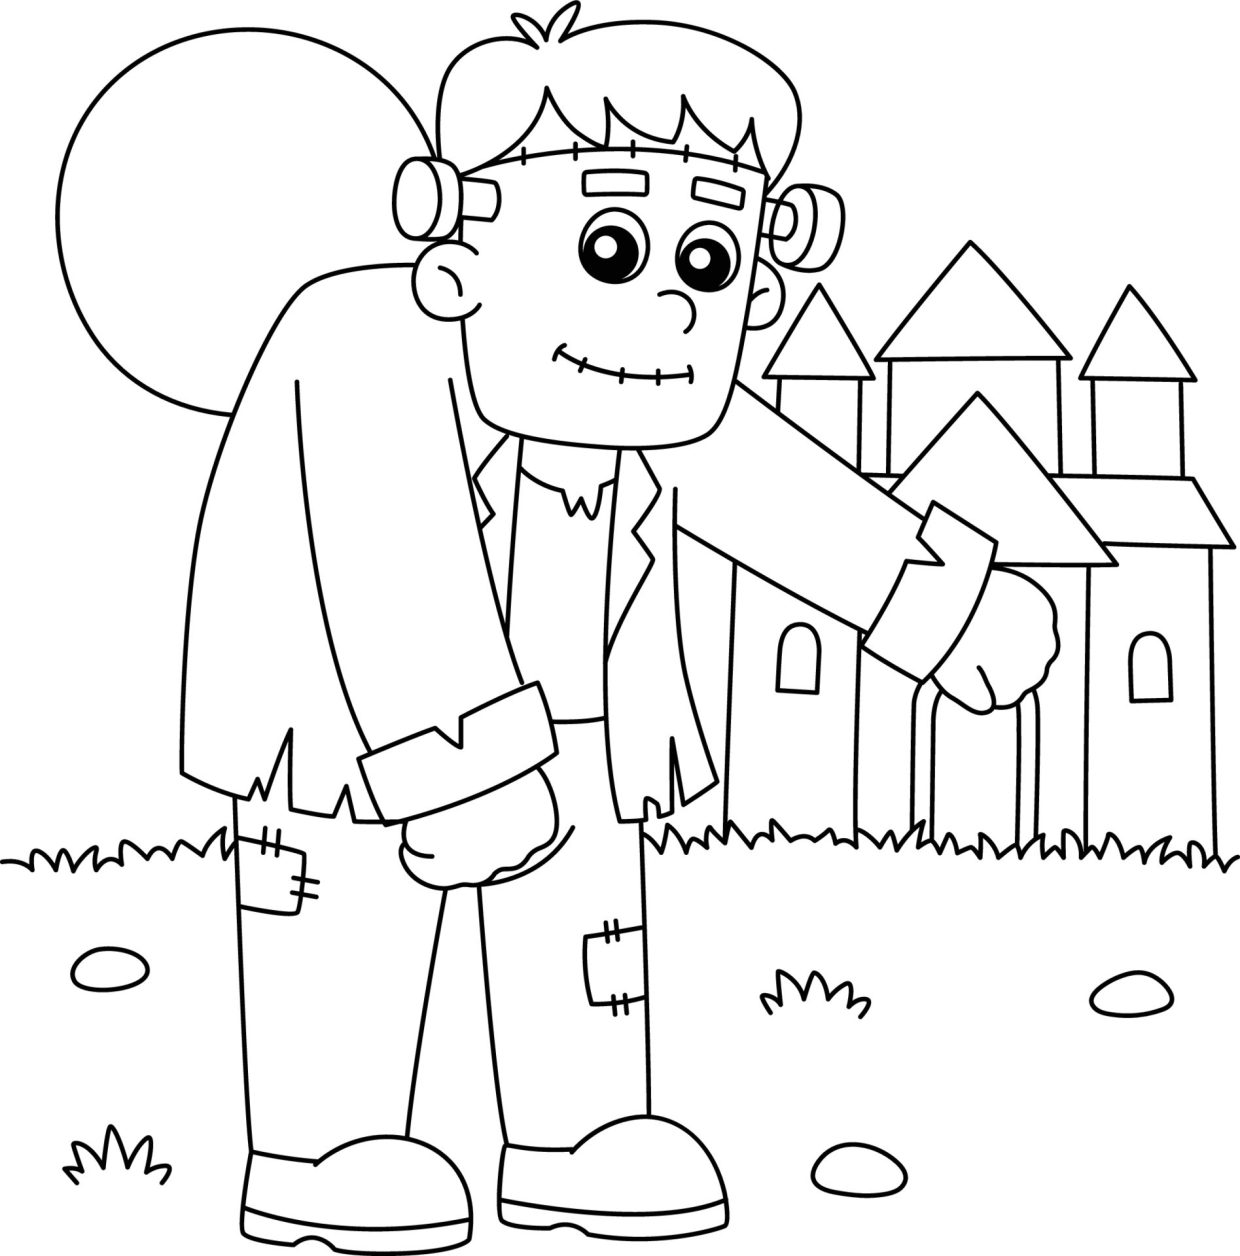 Frankenstein Coloring Pages - Free Printable Sheets for Kids